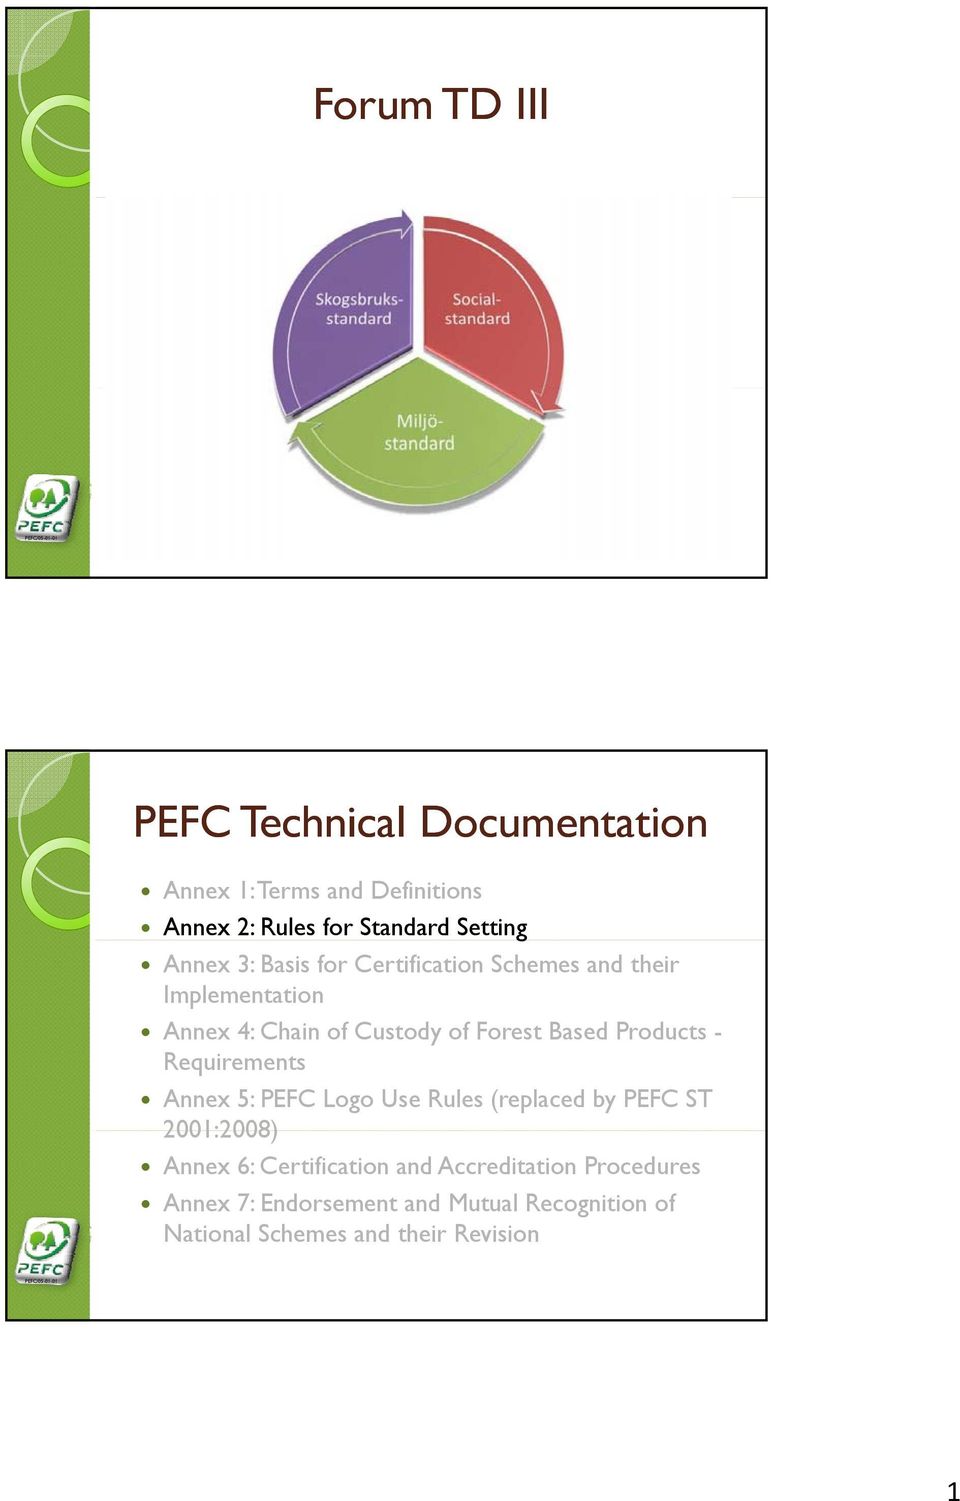 Products - Requirements Annex 5: PEFC Logo Use Rules (replaced by PEFC ST 2001:2008) Annex 6: Certification